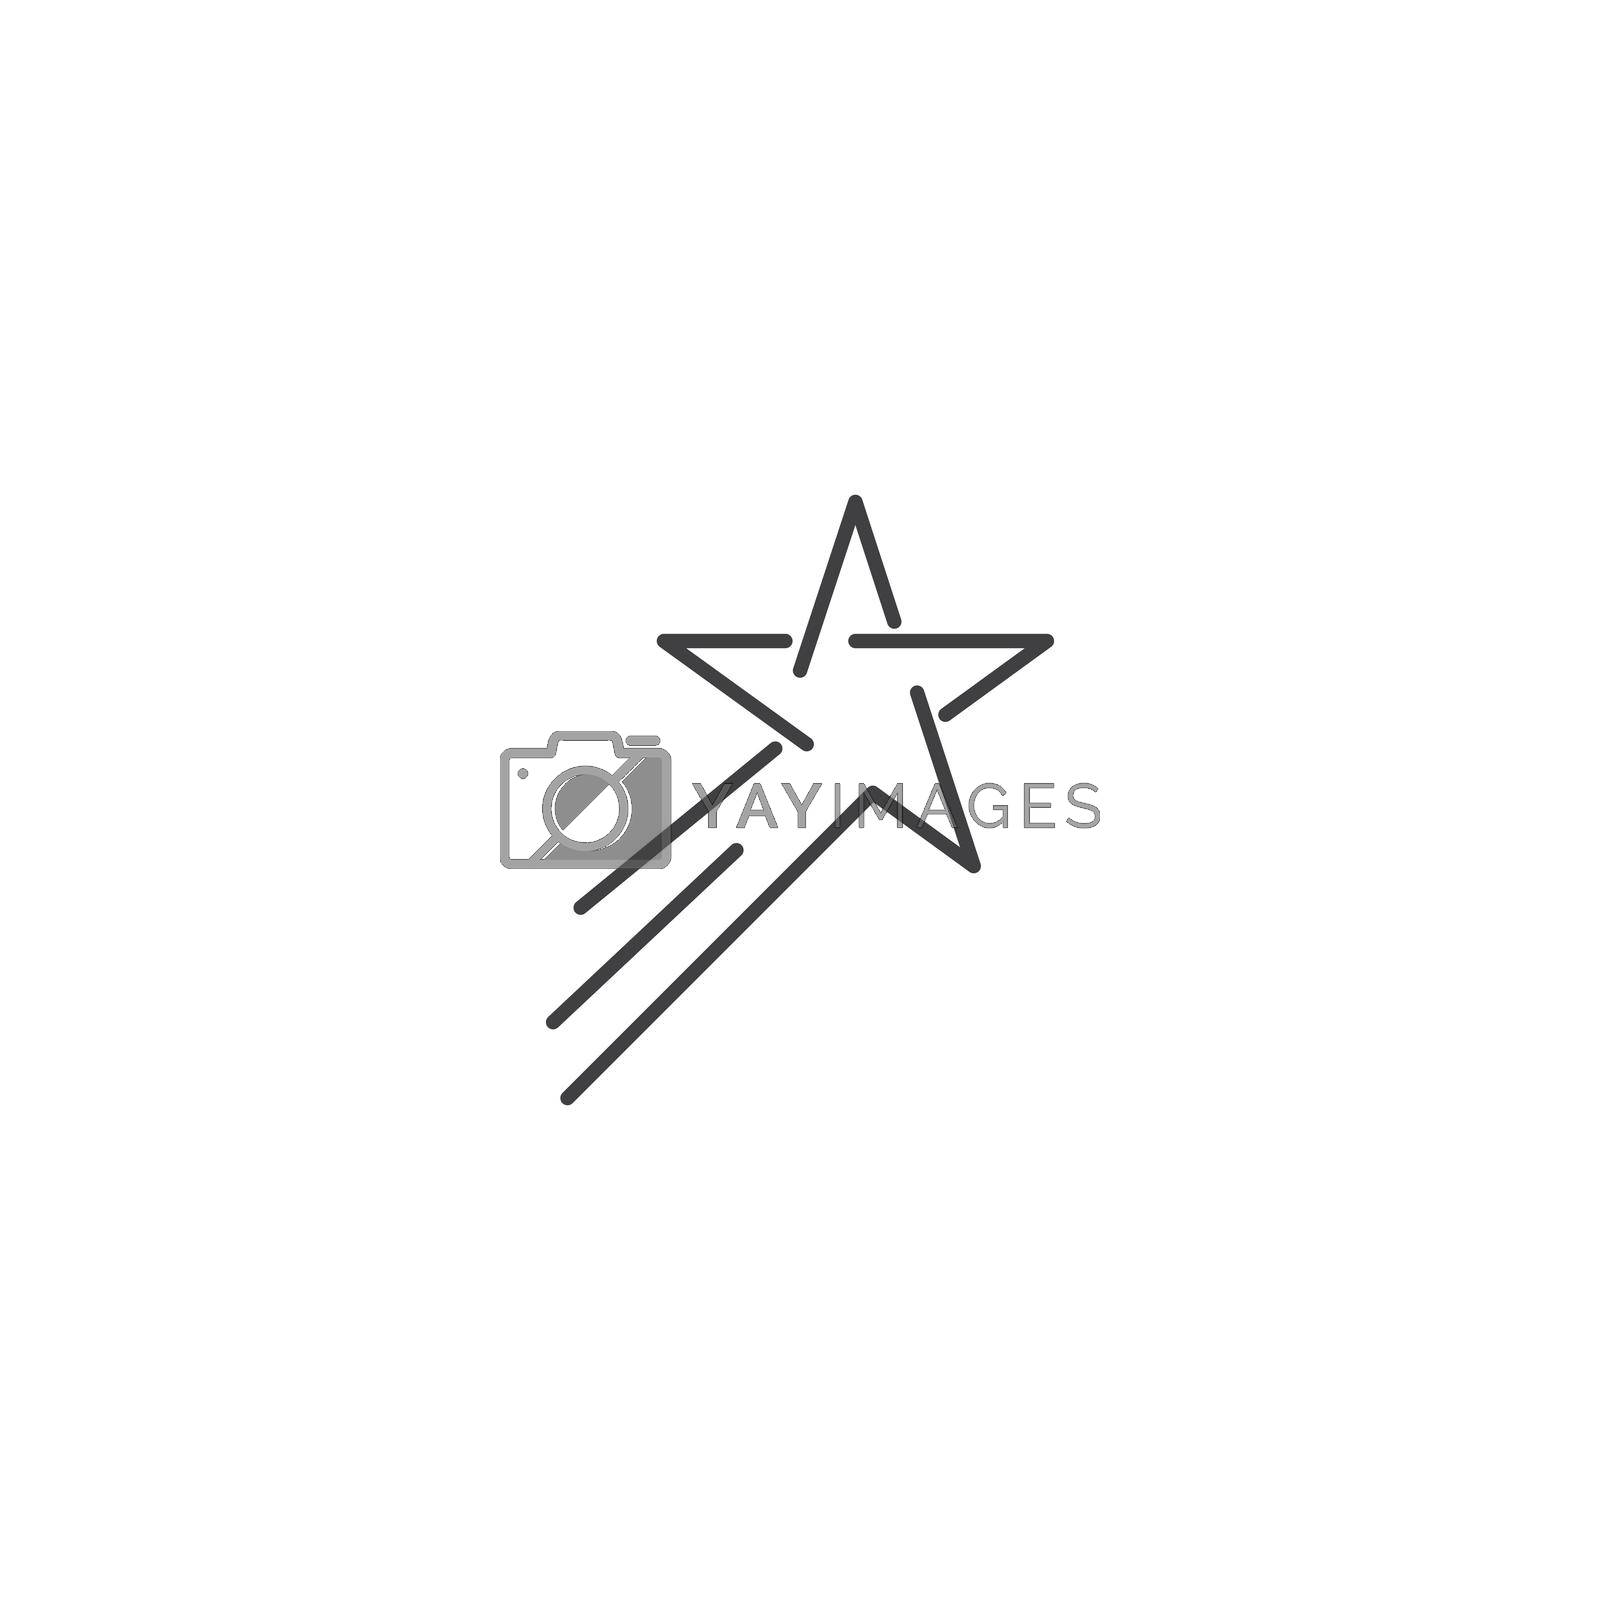 Royalty free image of Star Logo by awk